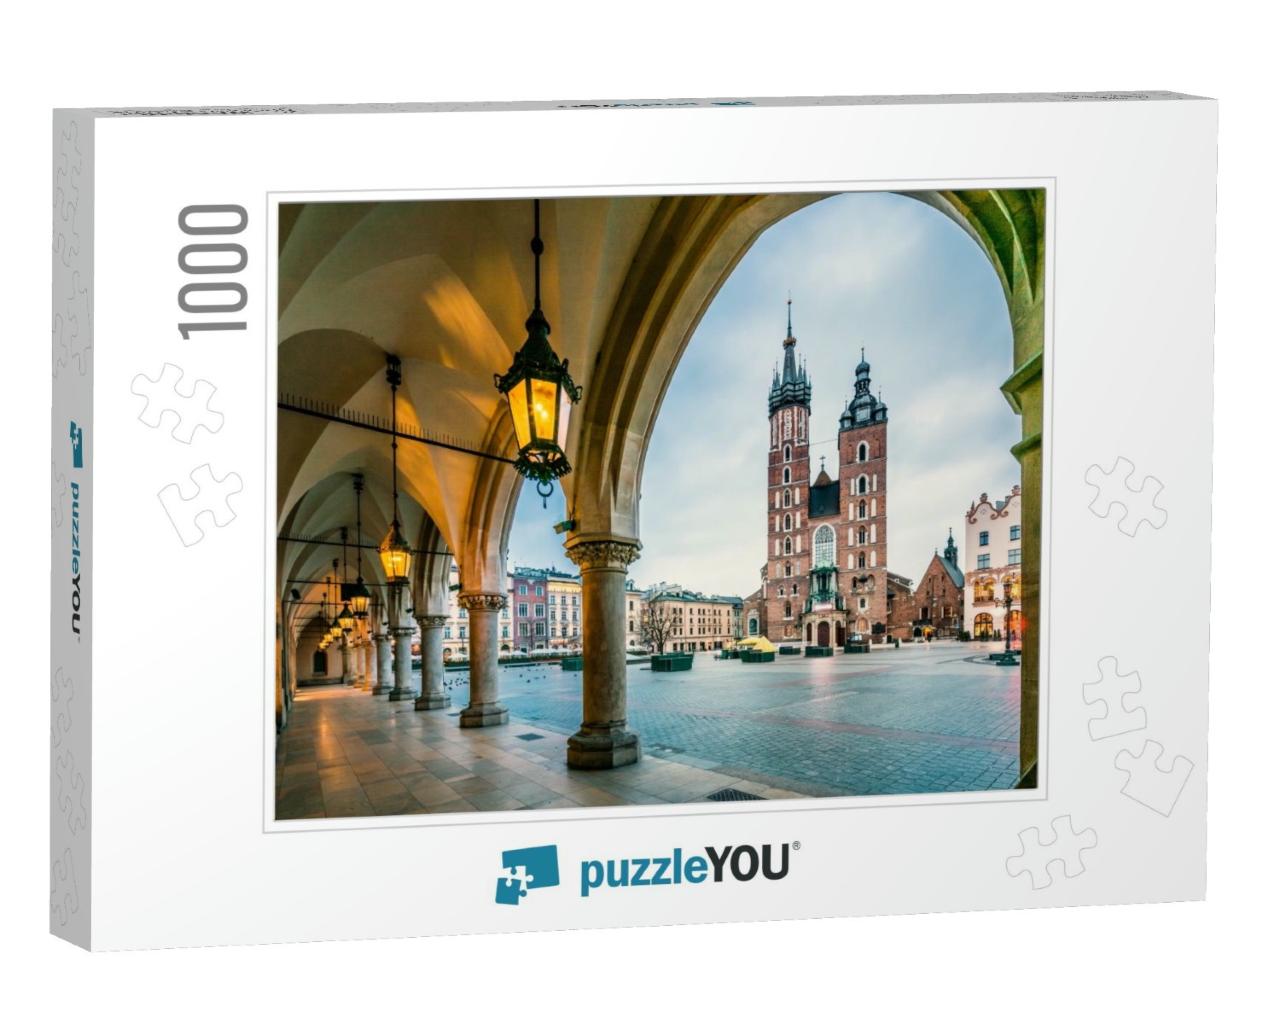 Beautiful Krakow Market Square, Poland, Europe. Faded Col... Jigsaw Puzzle with 1000 pieces